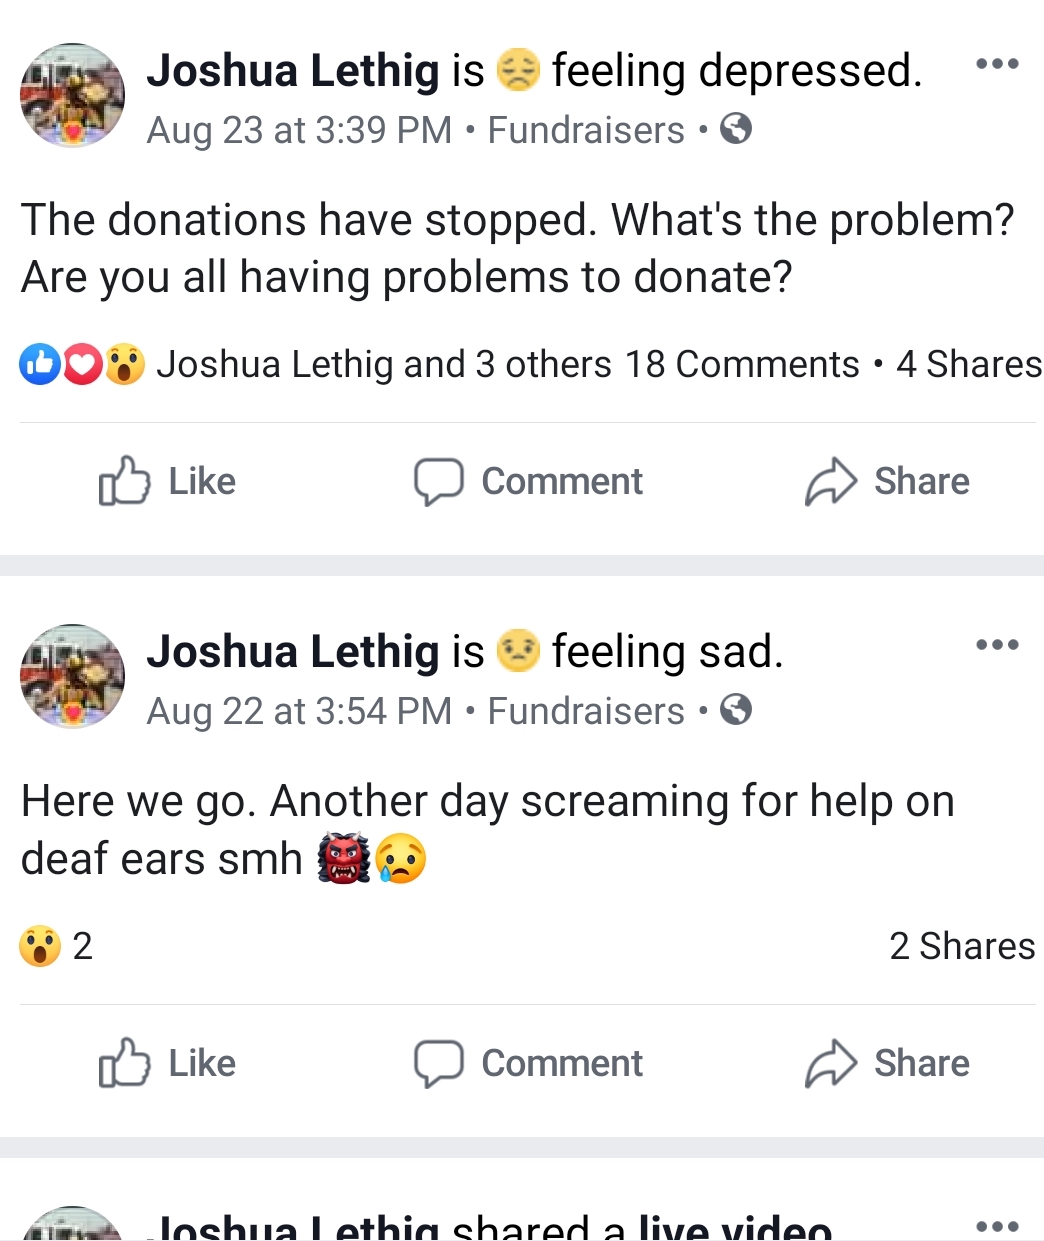 icon - Joshua Lethig is feeling depressed. Aug 23 at Fundraisers The donations have stopped. What's the problem? Are you all having problems to donate? Do Joshua Lethig and 3 others 18 4 o Comment Joshua Lethig is feeling sad. Aug 22 at Fundraisers Here w